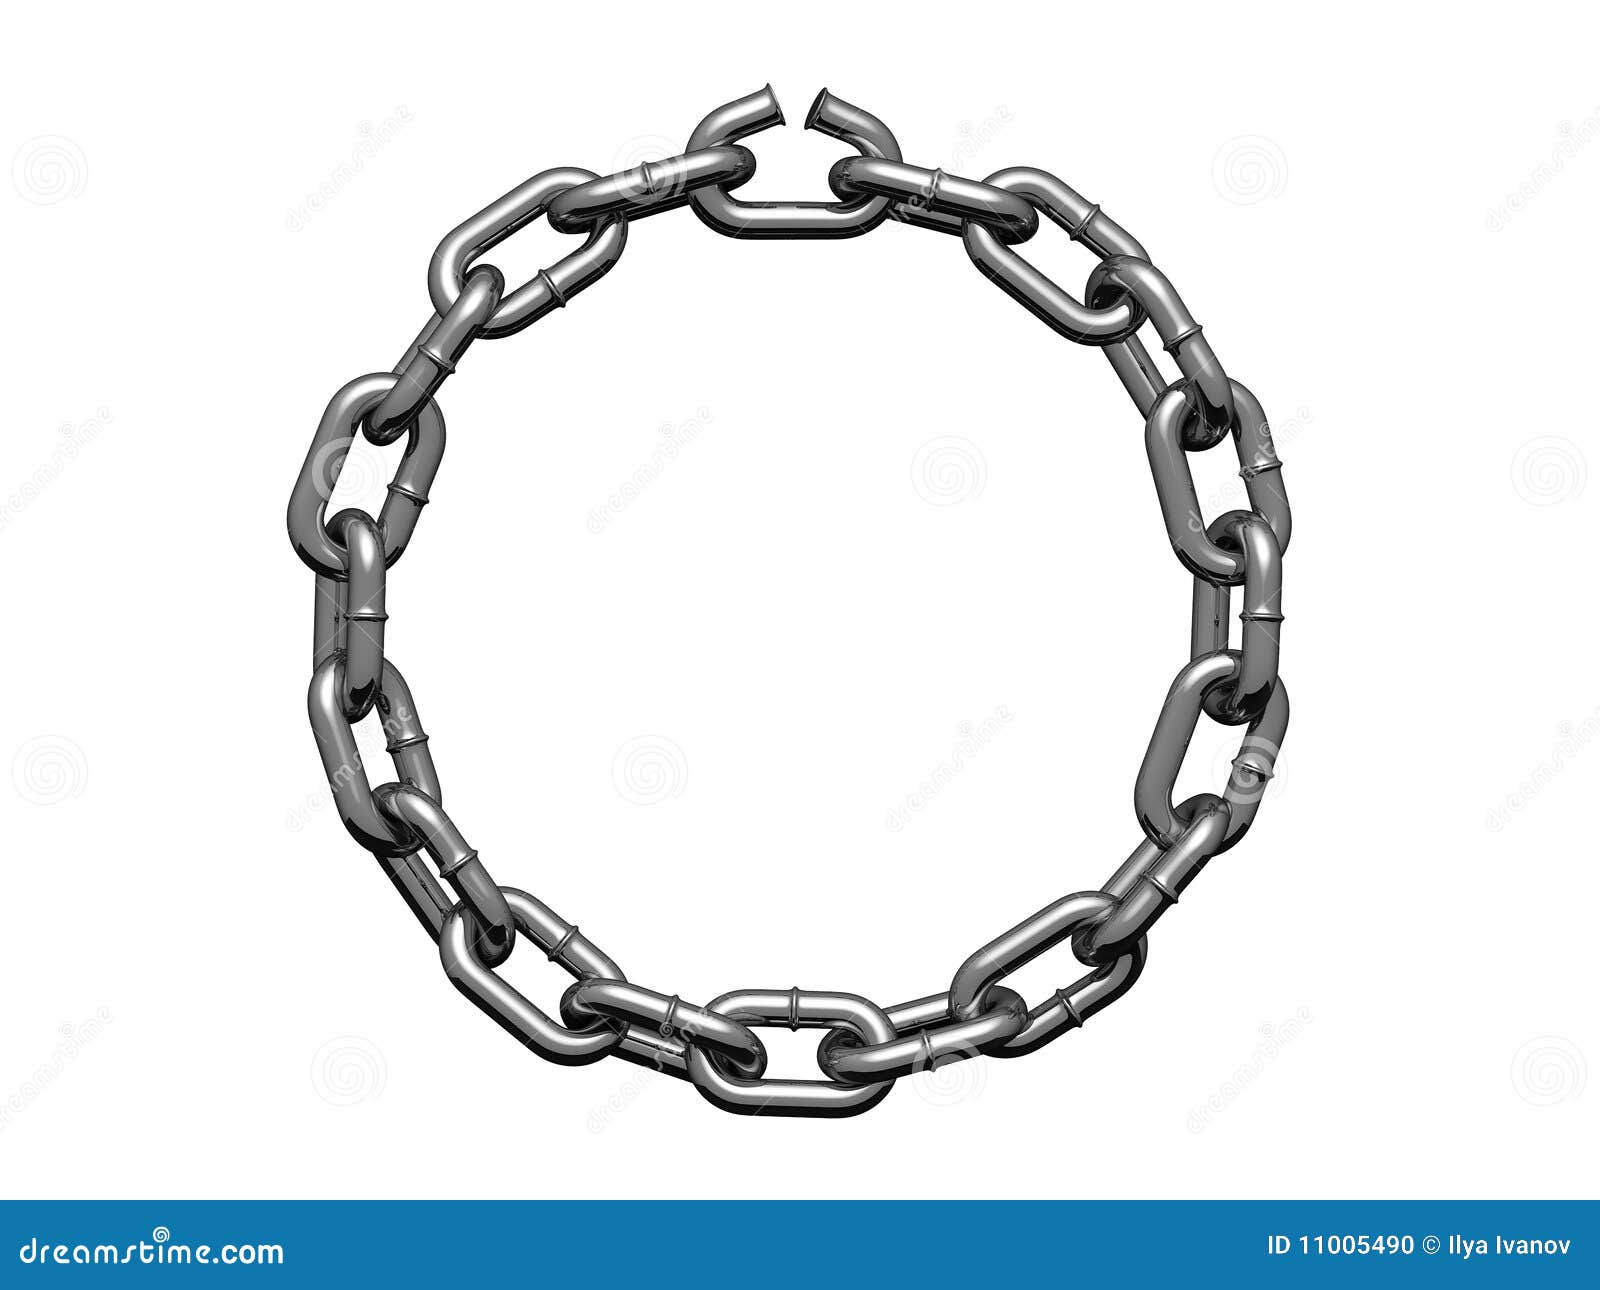 Chain In Form Of The Circle With Weak Link Stock Photo - Image: 11005490